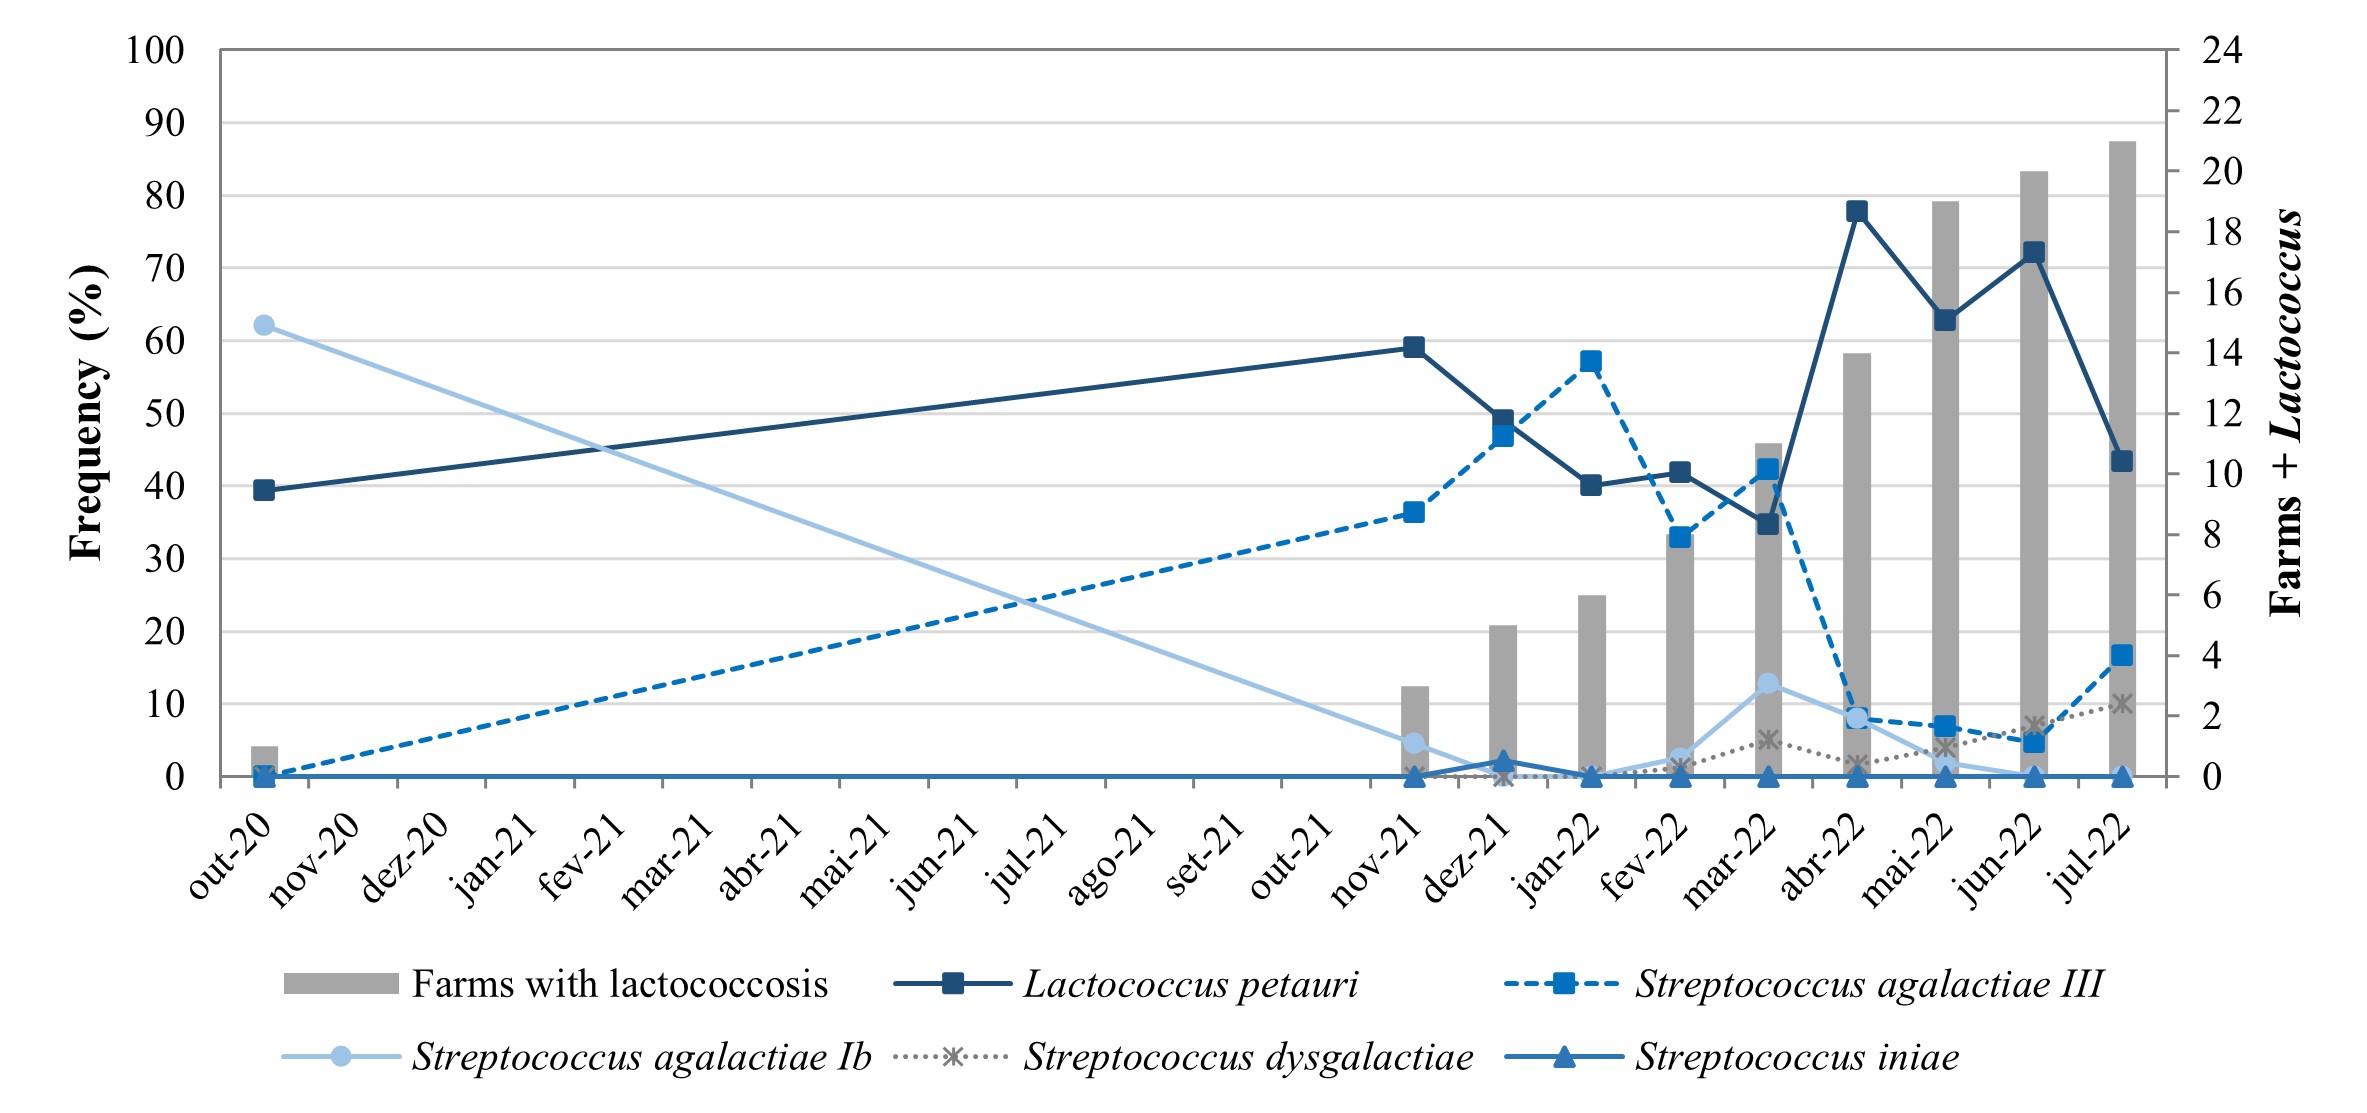 Figure 1. Frequency of isolation of Lactococcus petauri and Streptococcus species in diseased tilapia reared in cages during the emergence of lactococcosis in Brazil between 2020-2022.